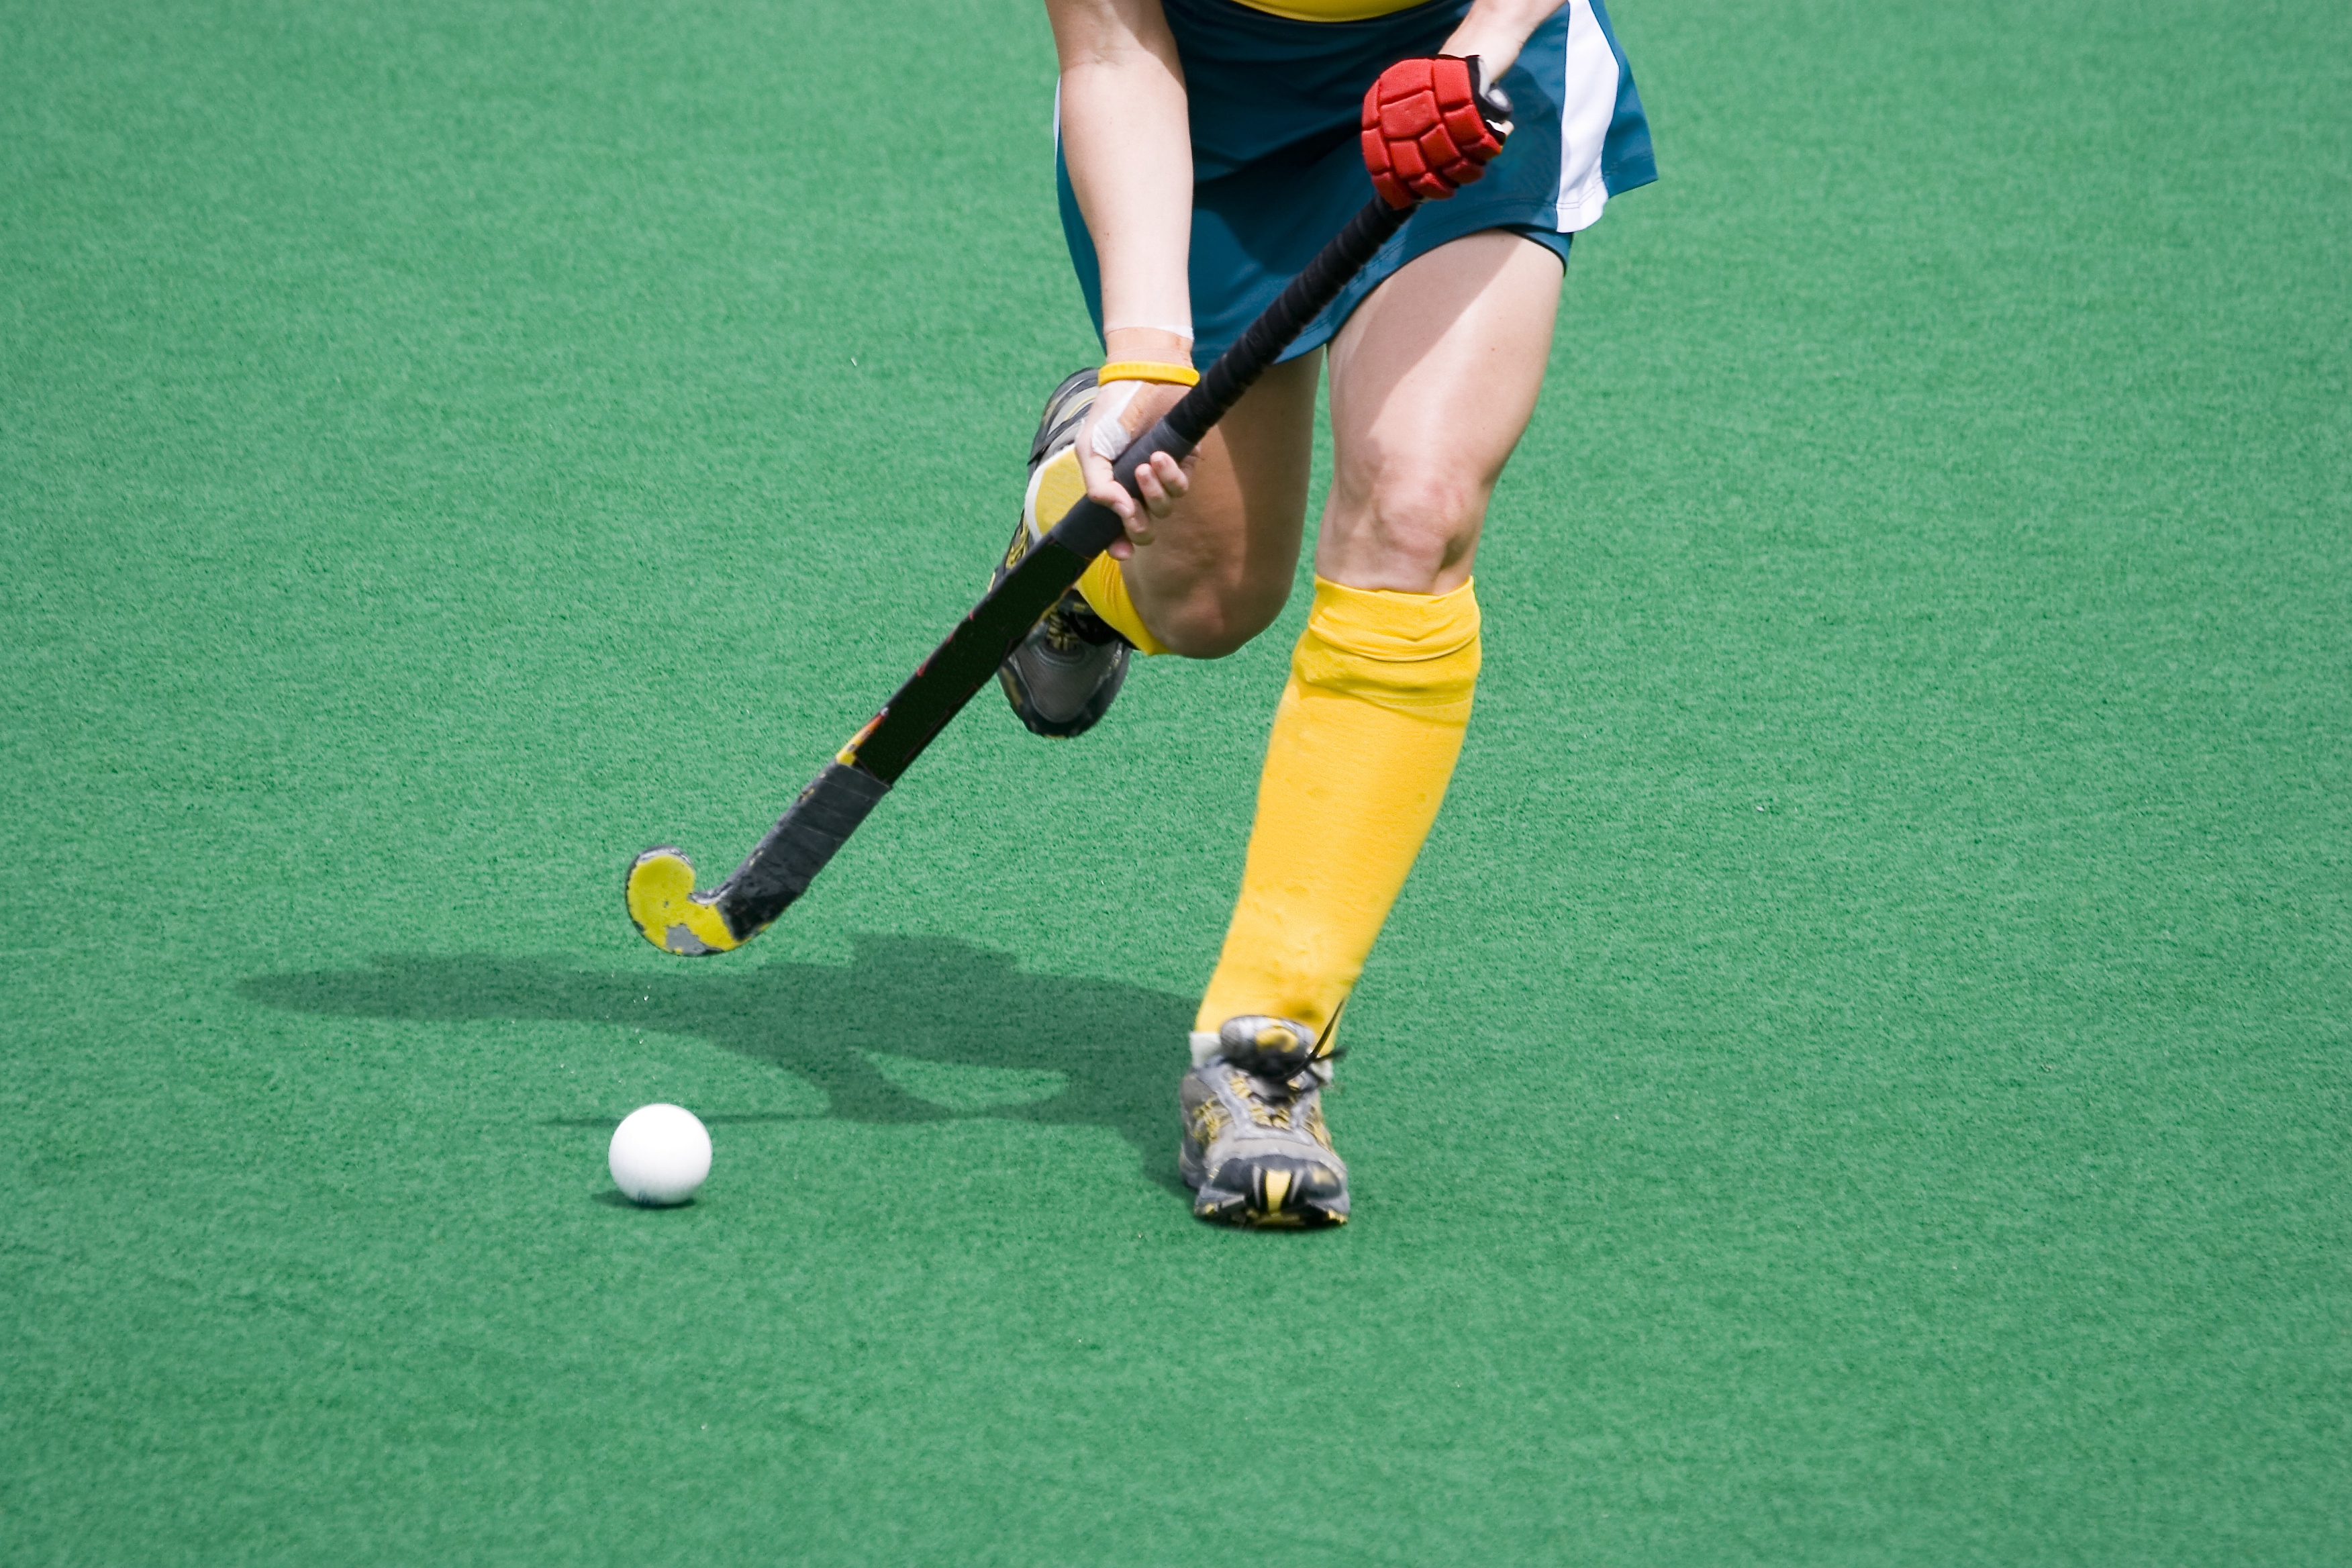 In synthetic fields designed for hockey, a shock-pads reduces ball bounce